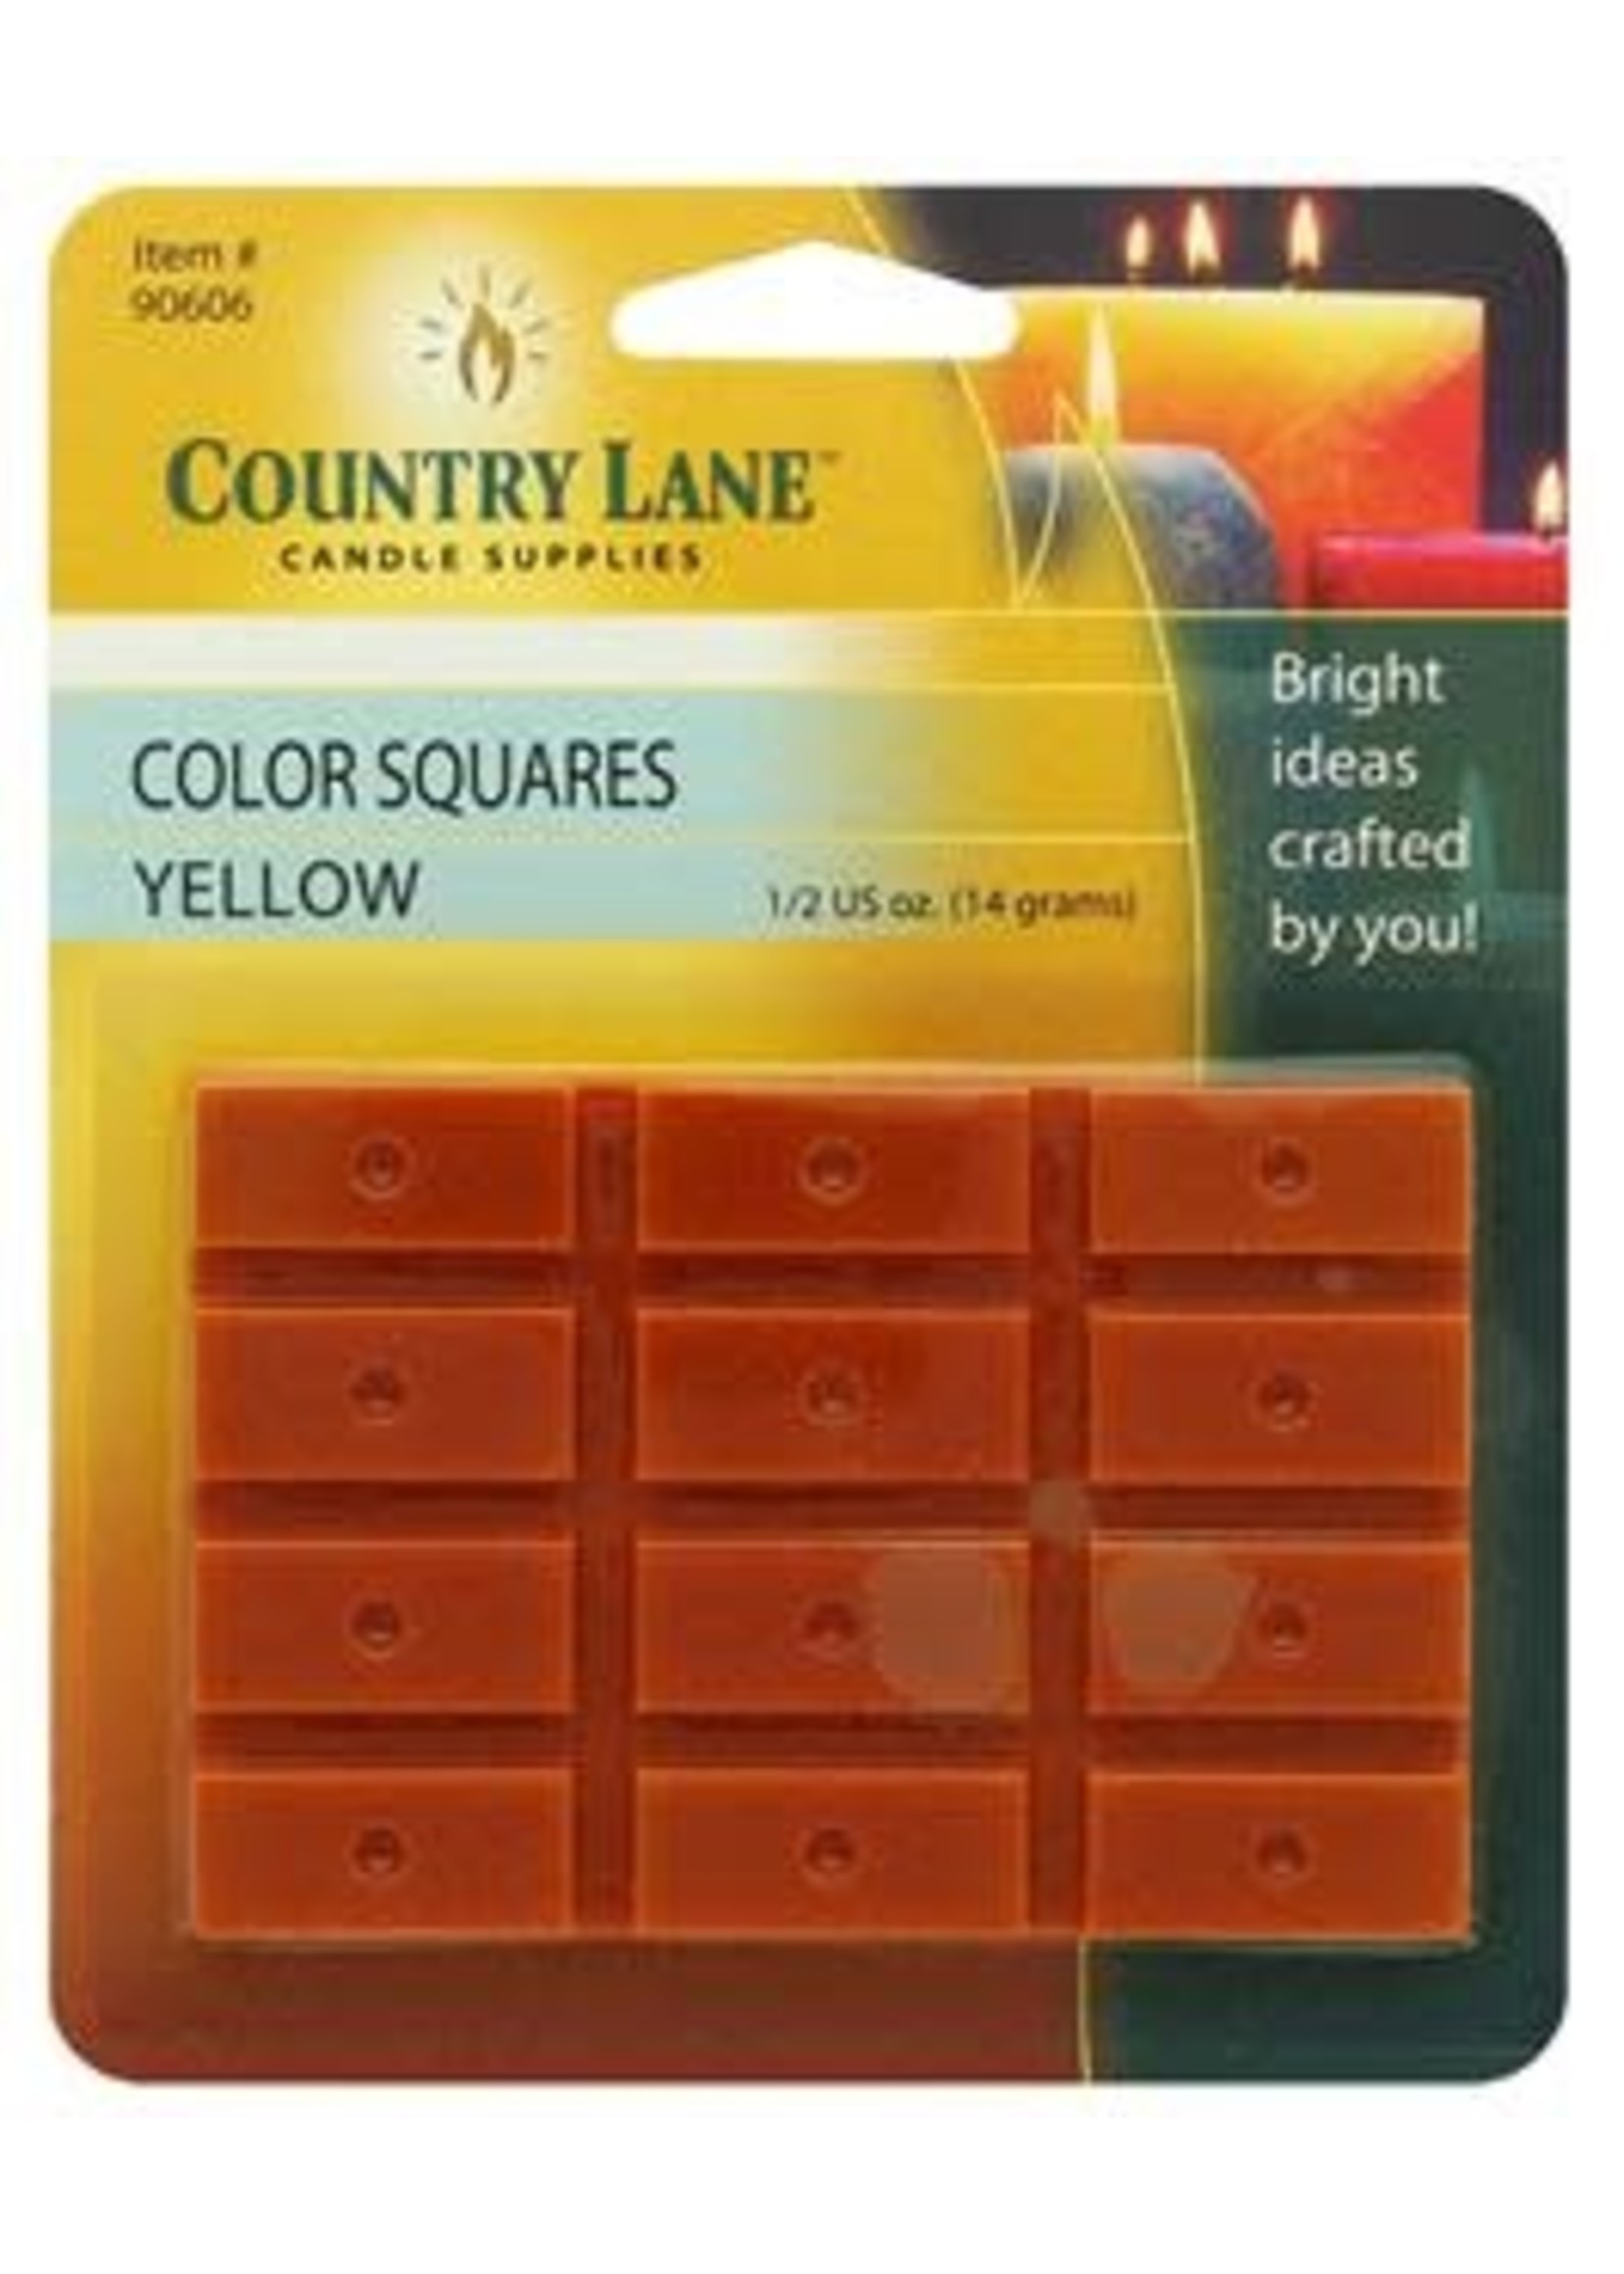 Country Lane Candle Color Squares .5oz Yellow